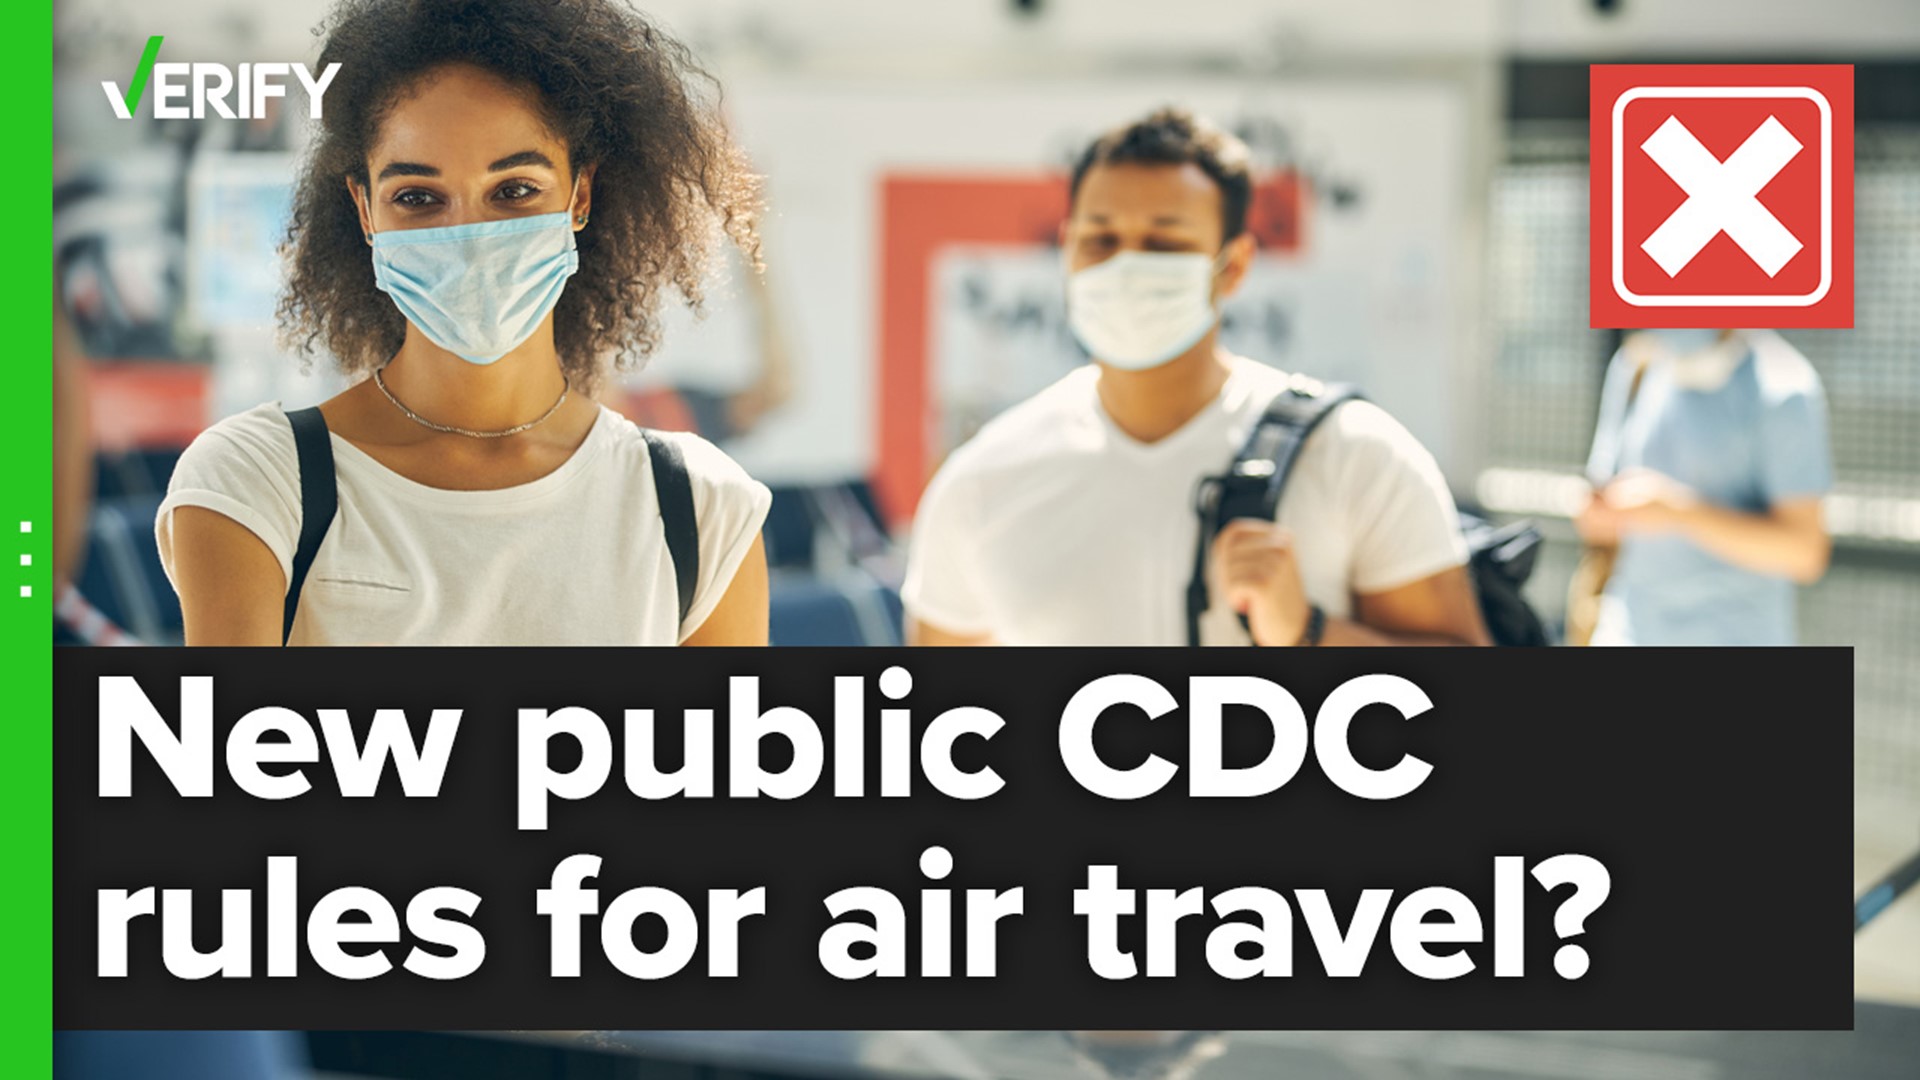 A misleading tweet suggested the CDC updated its guidelines to permit COVID-19 infected people to fly. The CDC has not actually changed its public travel guidance.